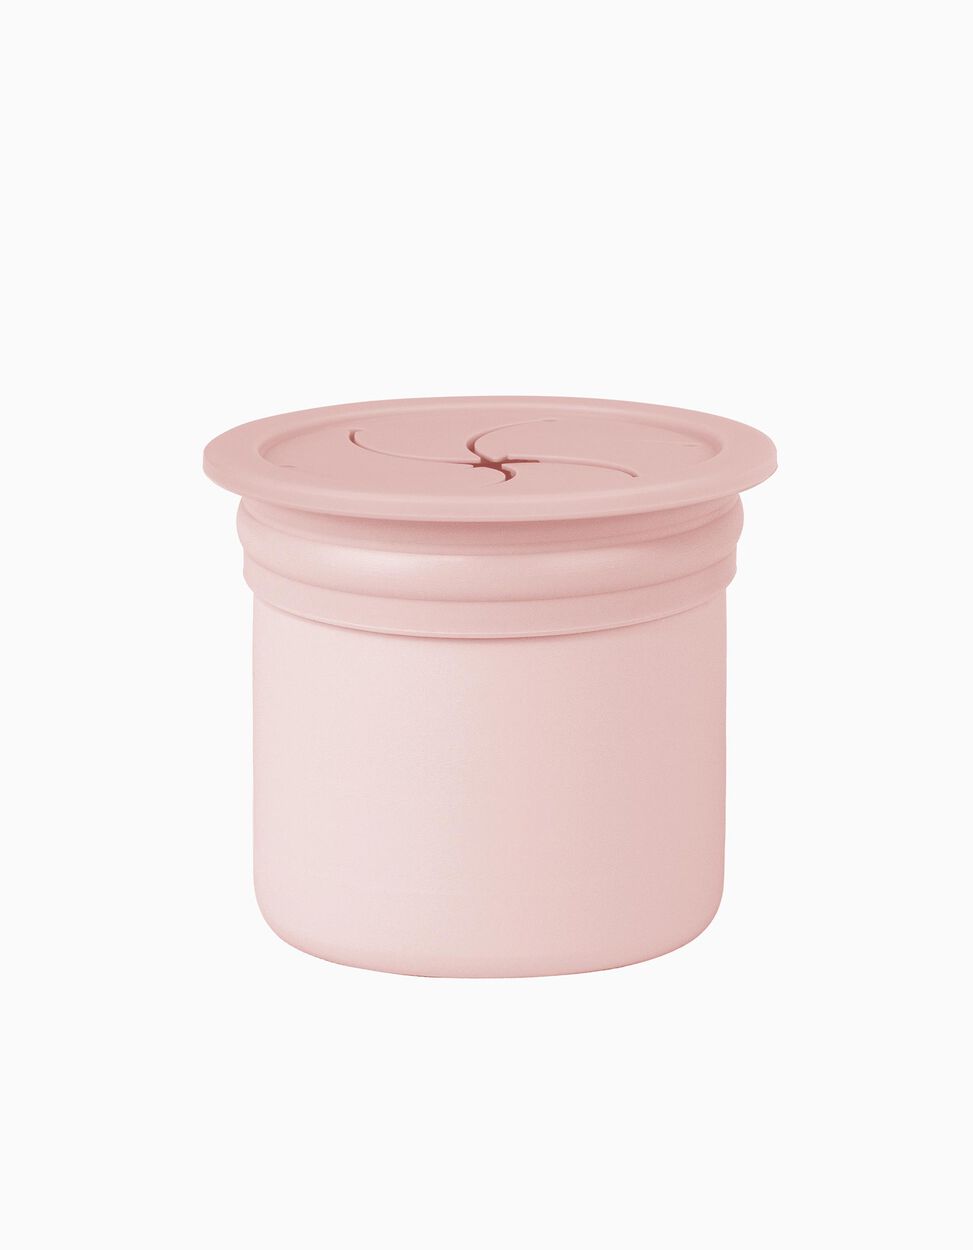 Snack Cup with Straw Pink/Grey Minikoioi 6M+